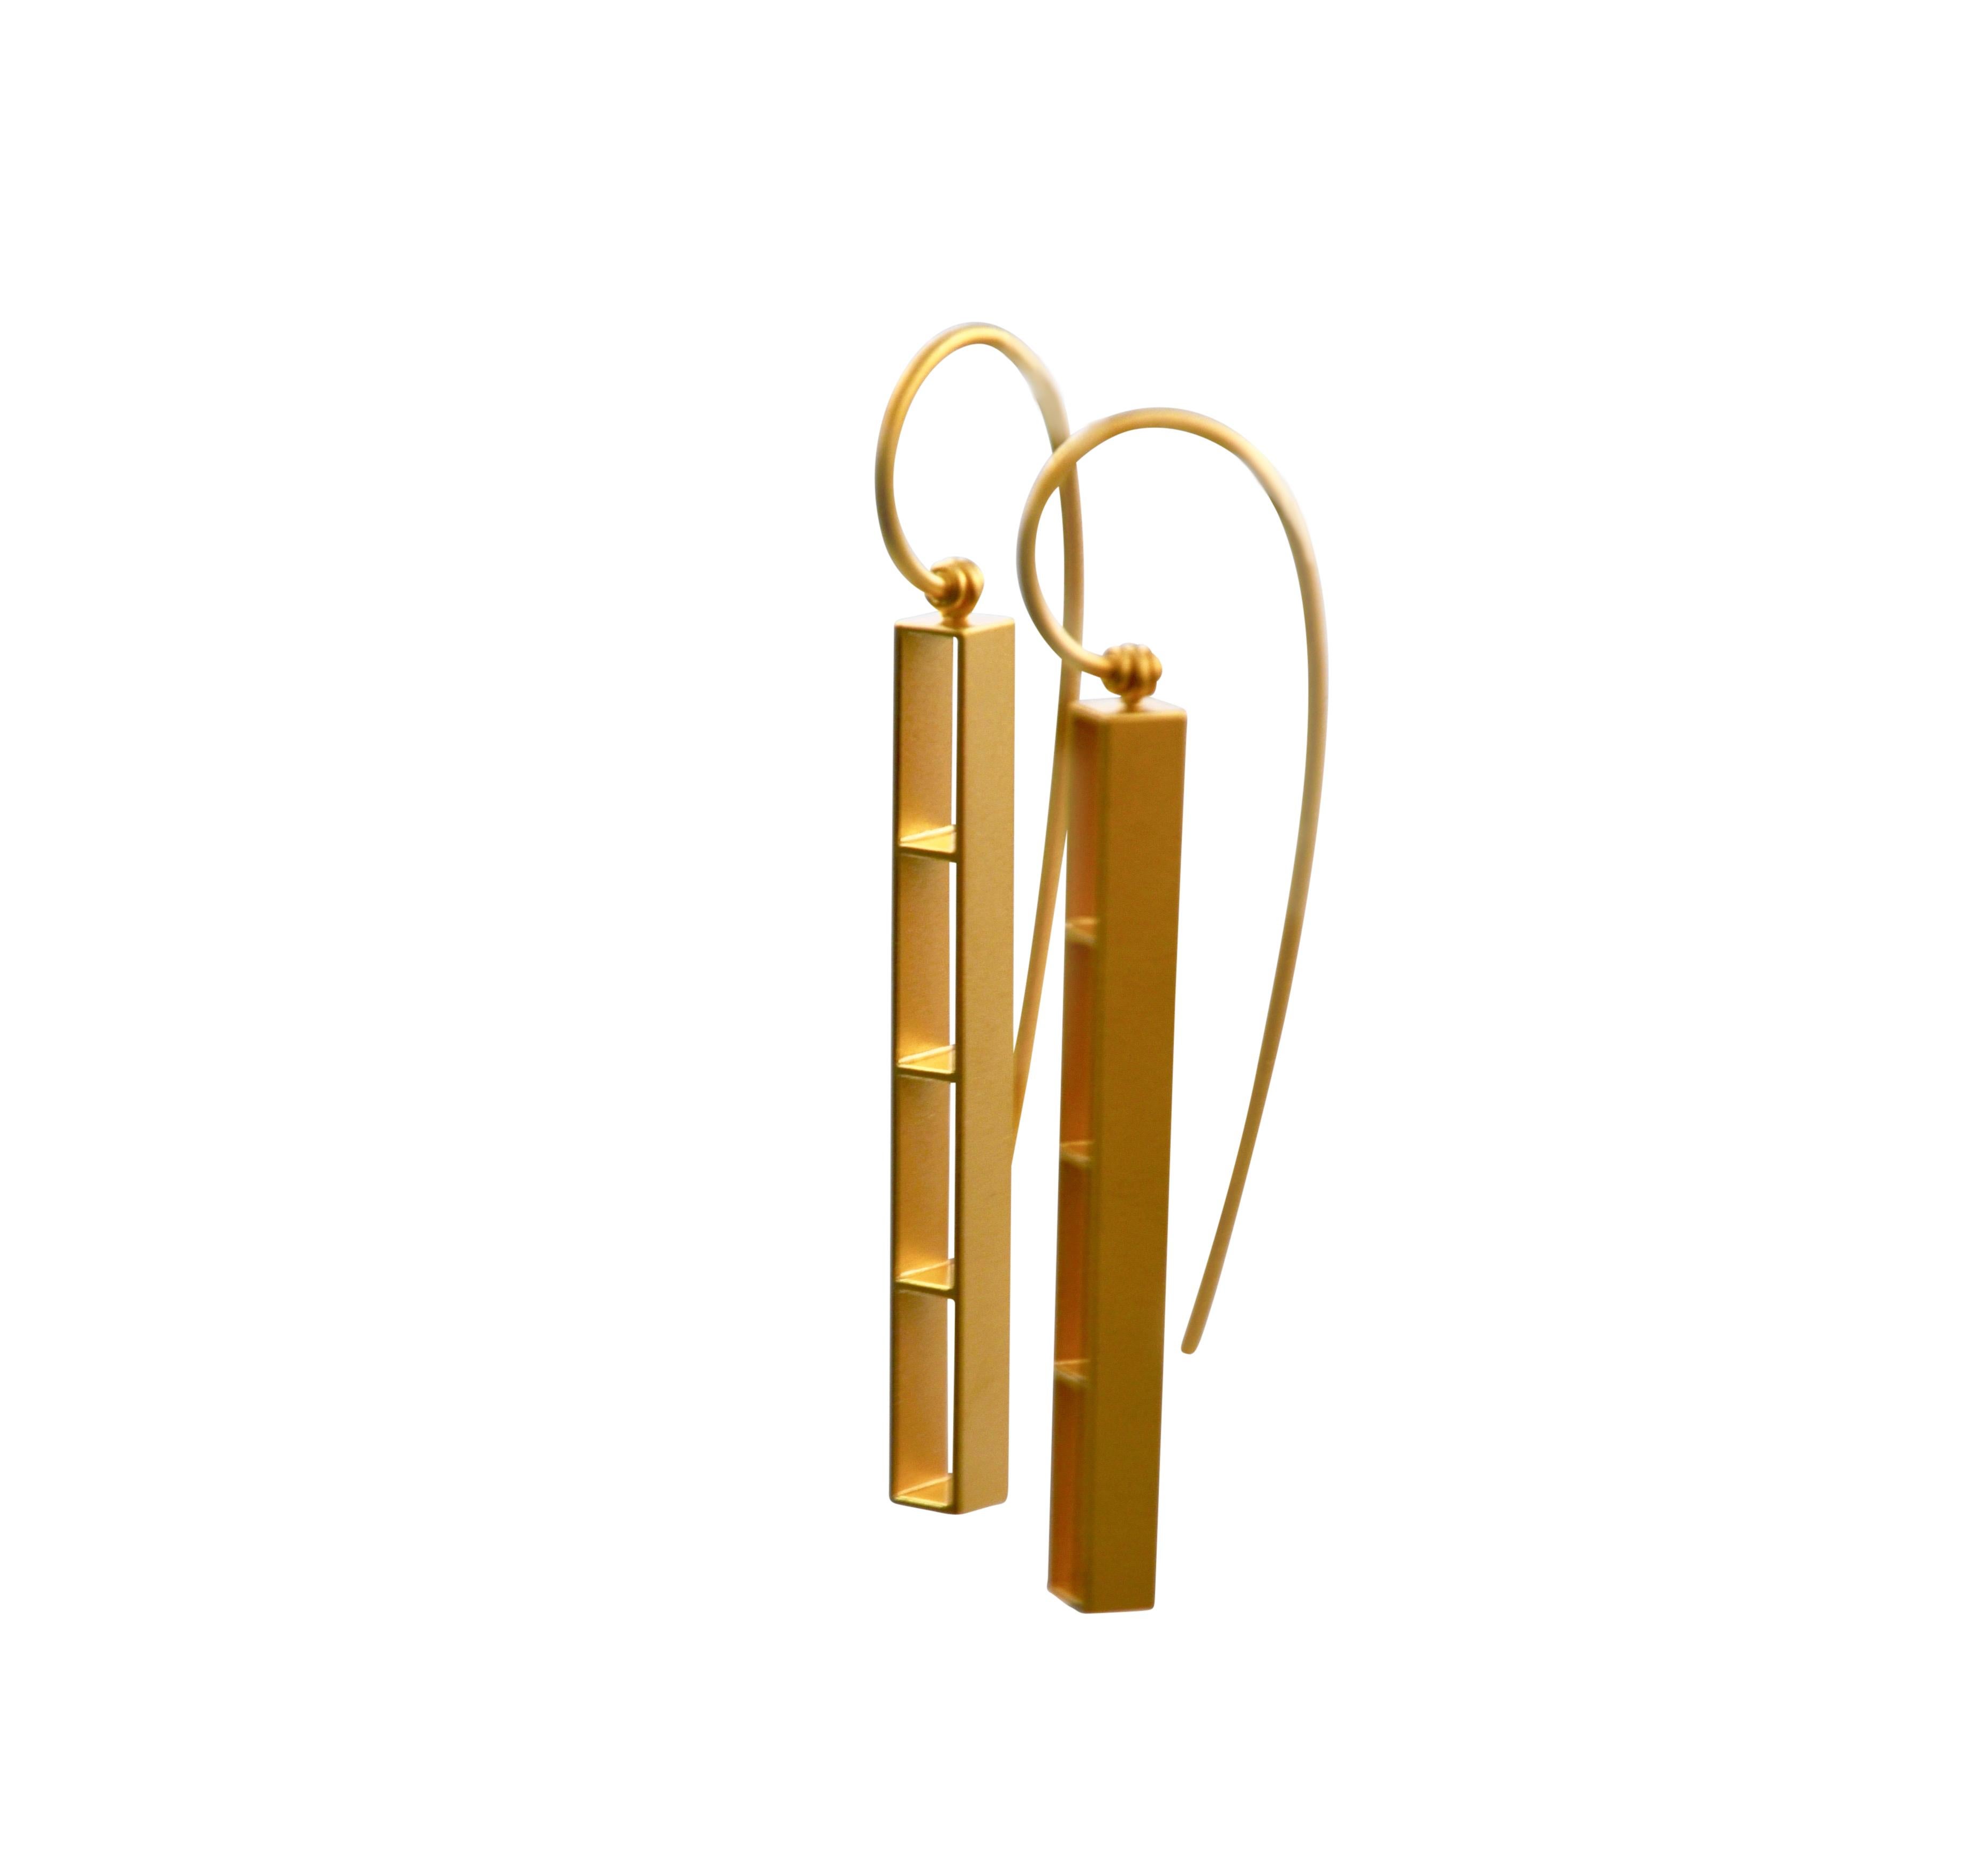 Contemporary 18 karat Yellow Gold Earrings.

Minimalist, classic, modern - handcrafted in our atelier, designed by Arno Schneider.